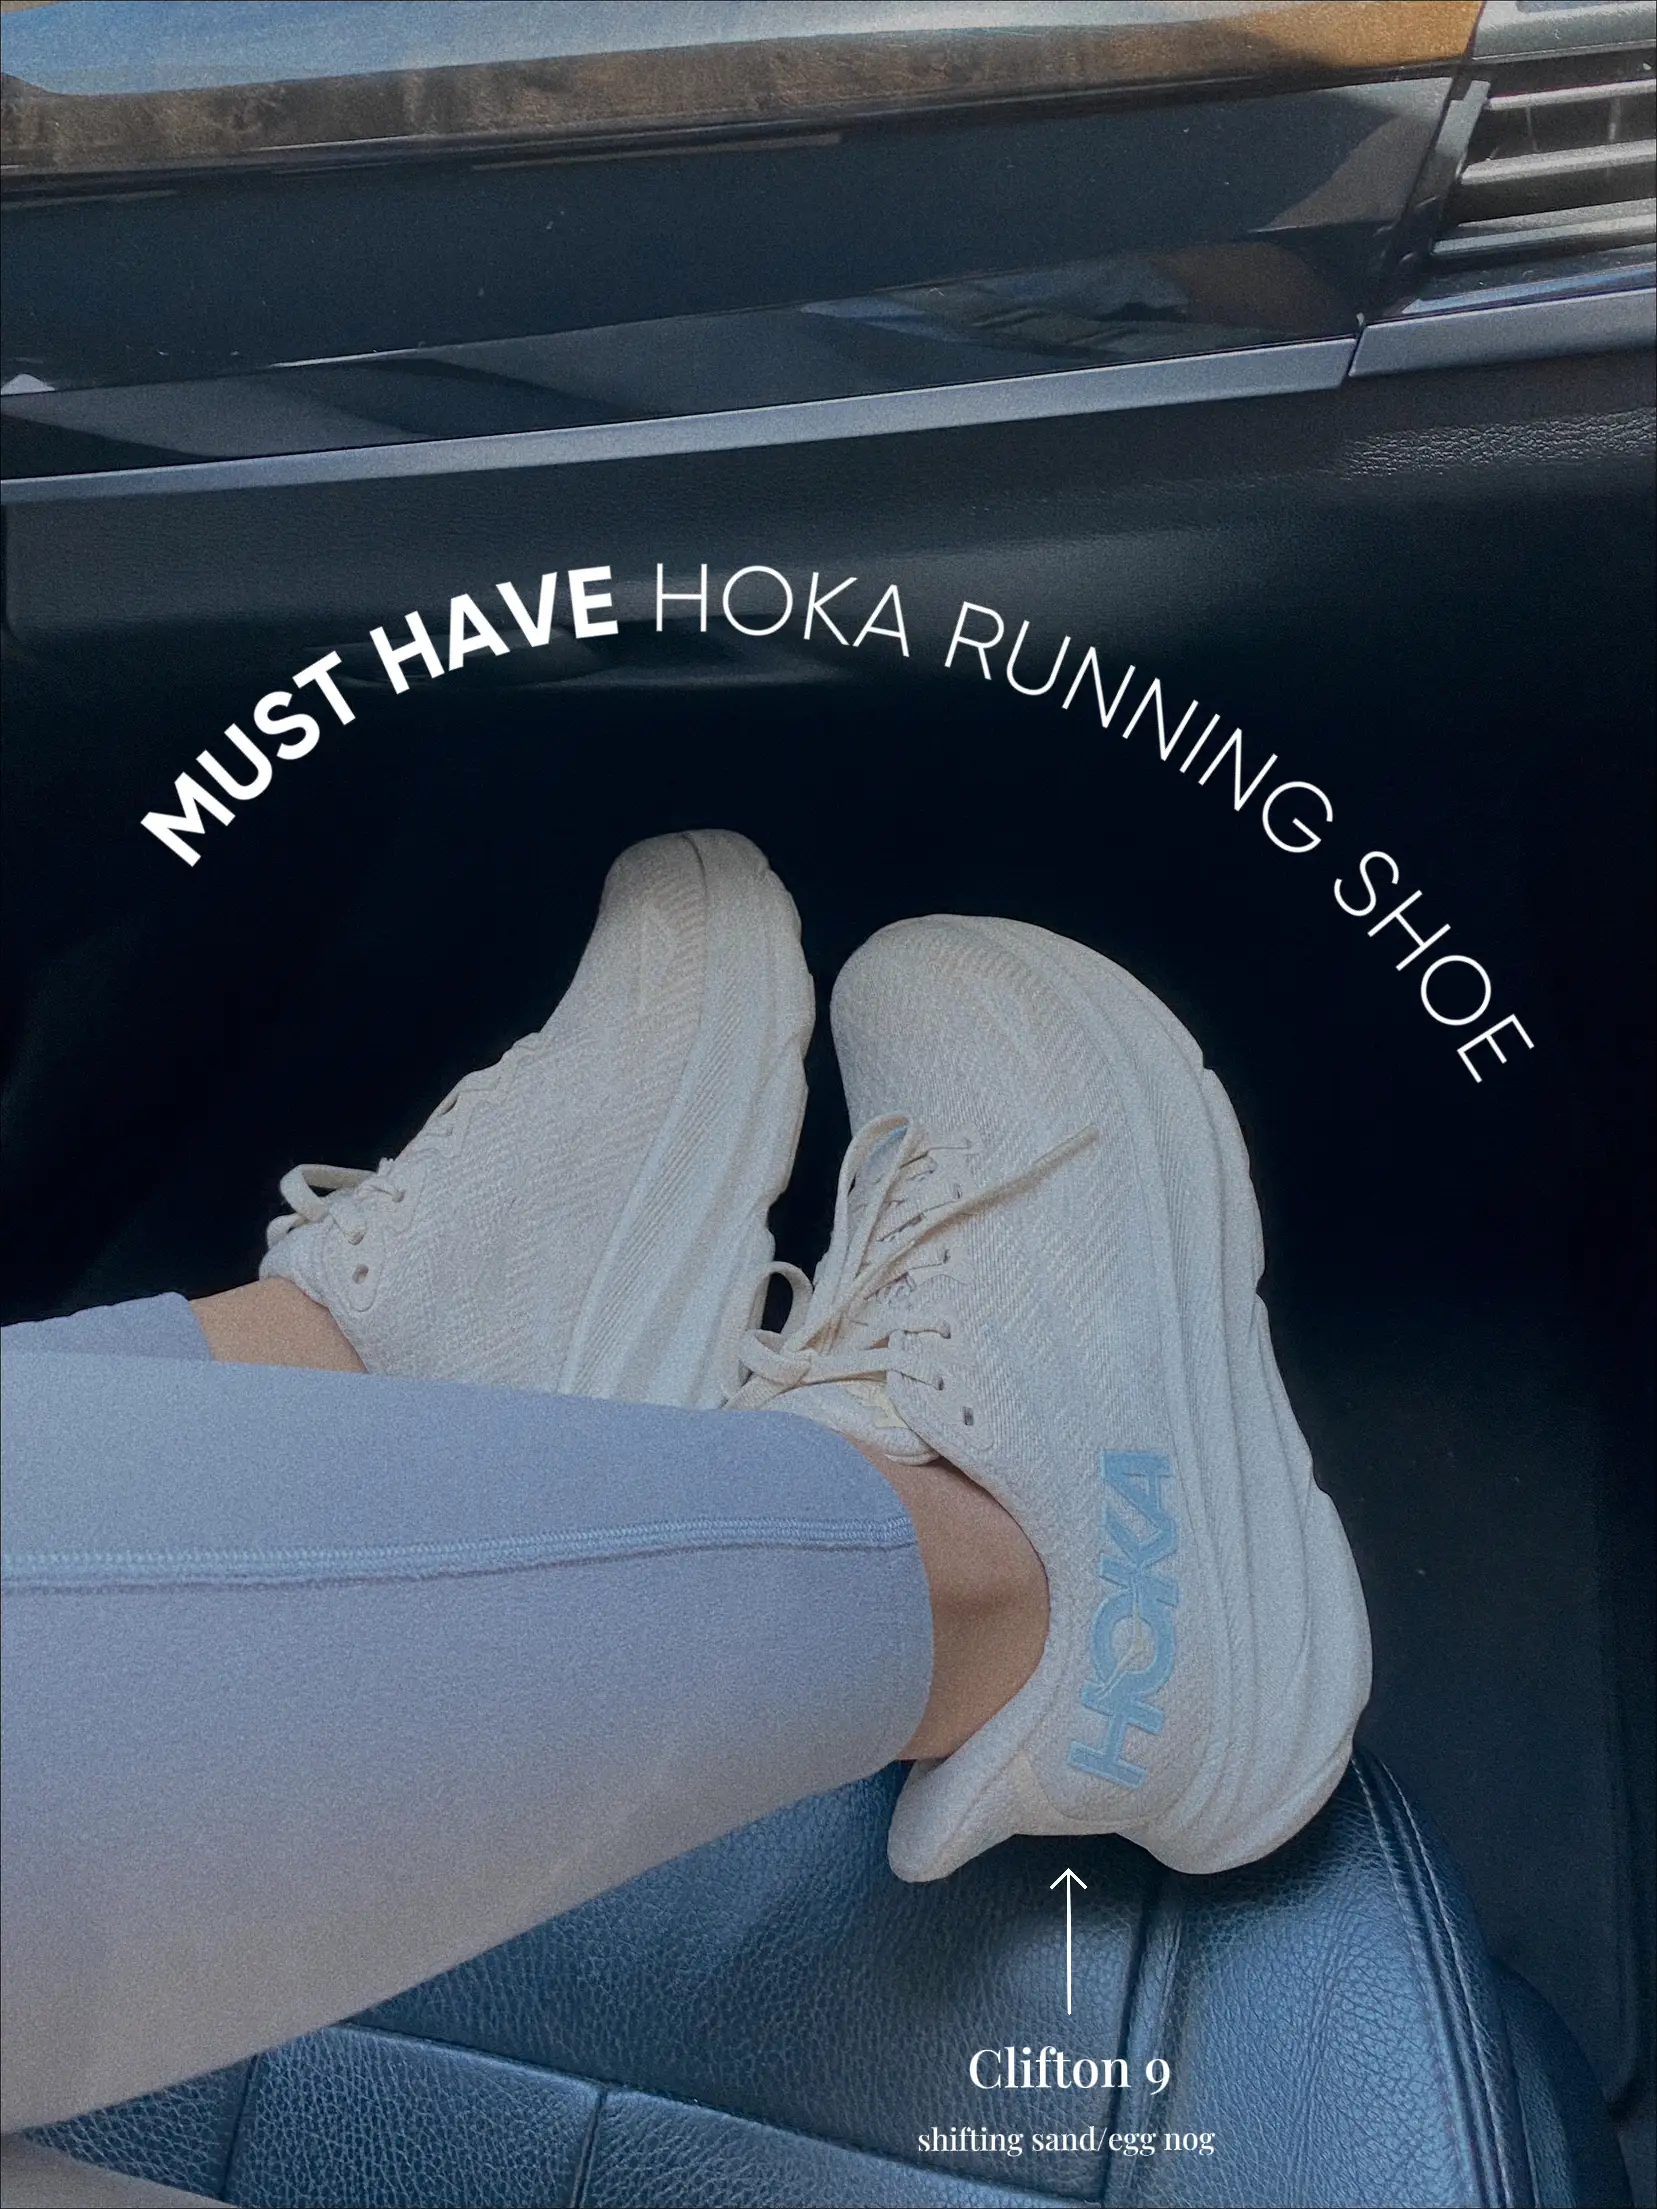 Hoka Clifton 9 Review 🏃‍♀️, Gallery posted by Caitlin Dubois